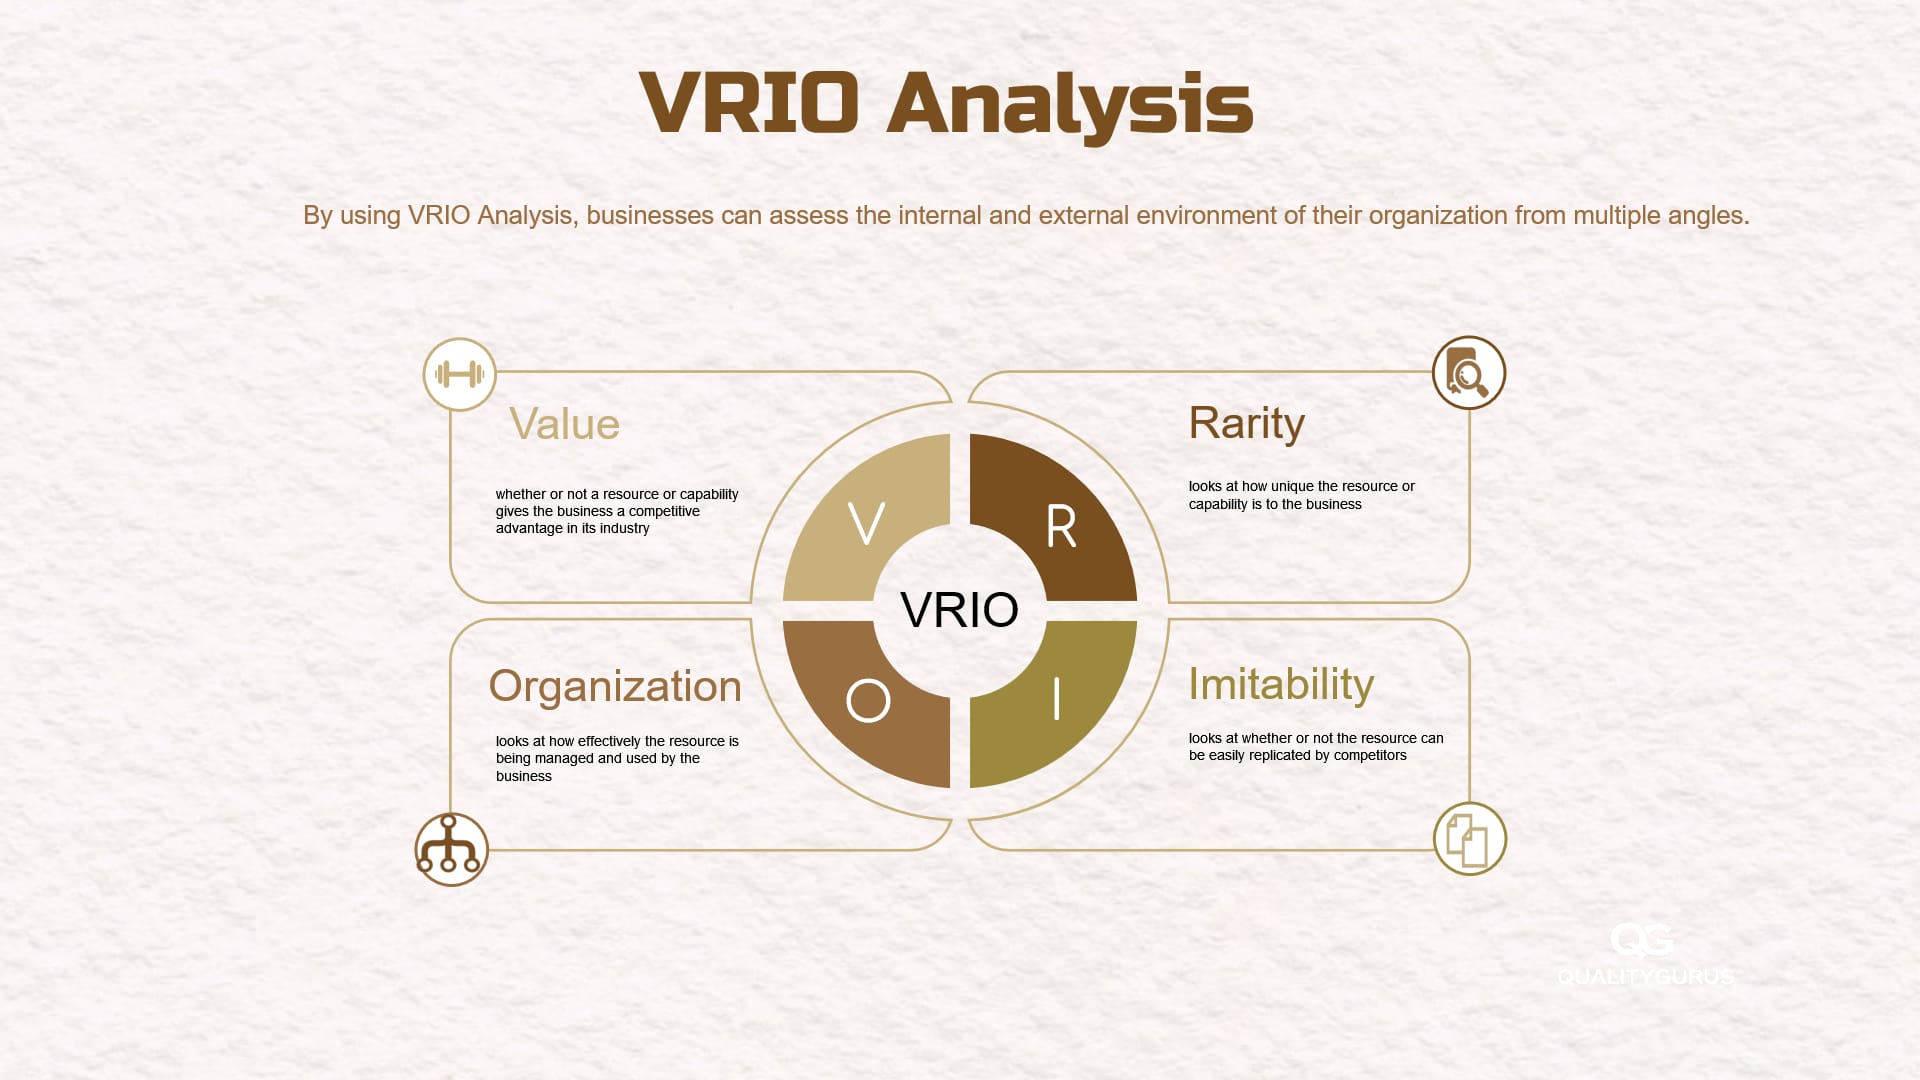 VRIO Analysis: A Tool for Strategic Business Planning